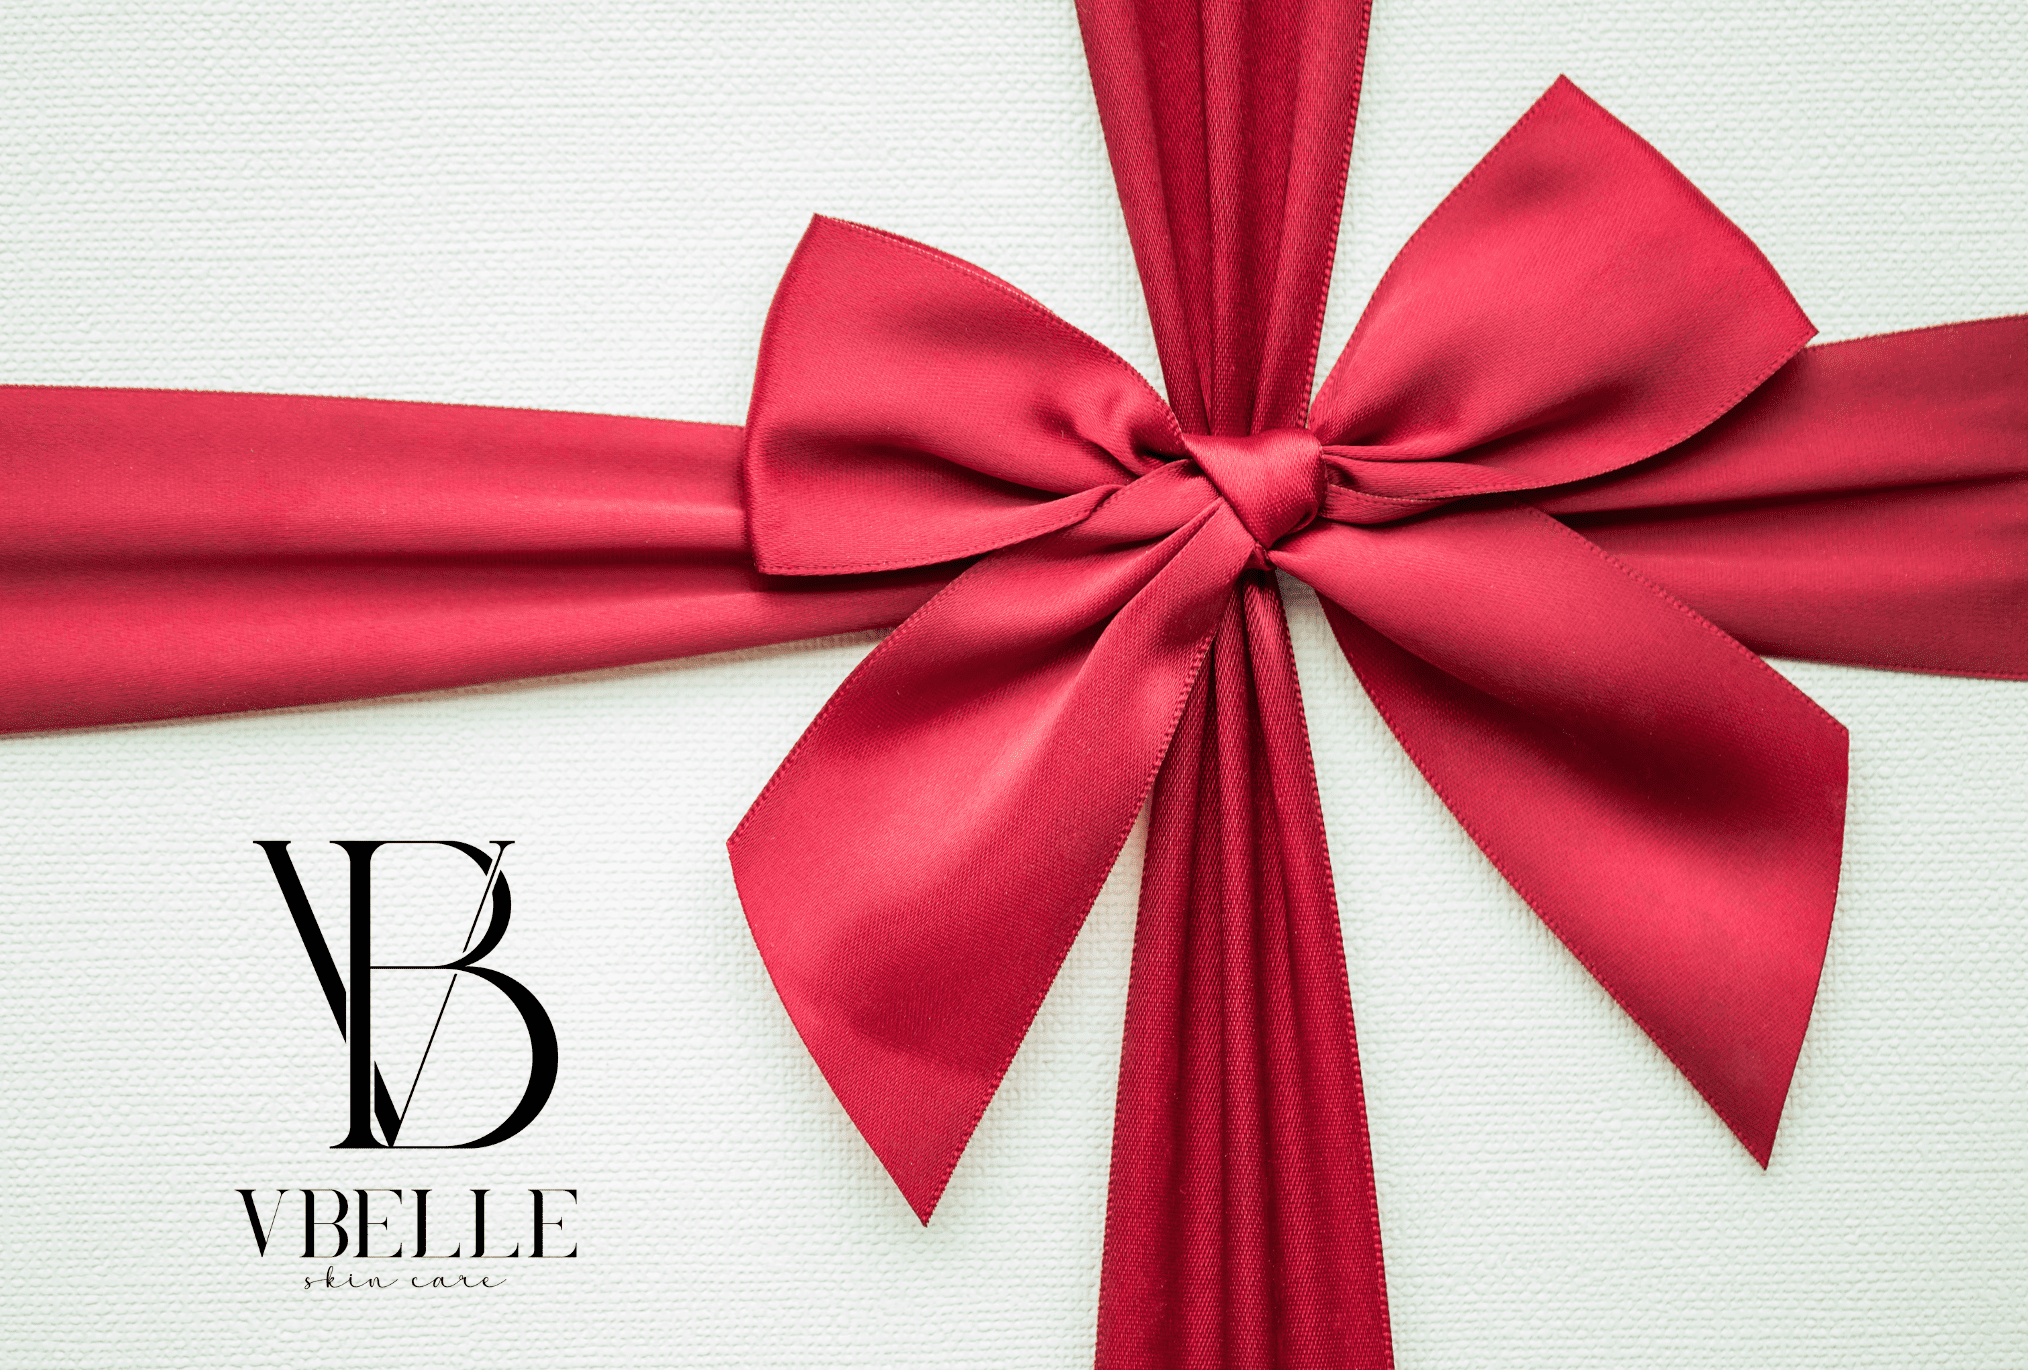 white gift card with a red bow and Vbelle Skin Care logo on it